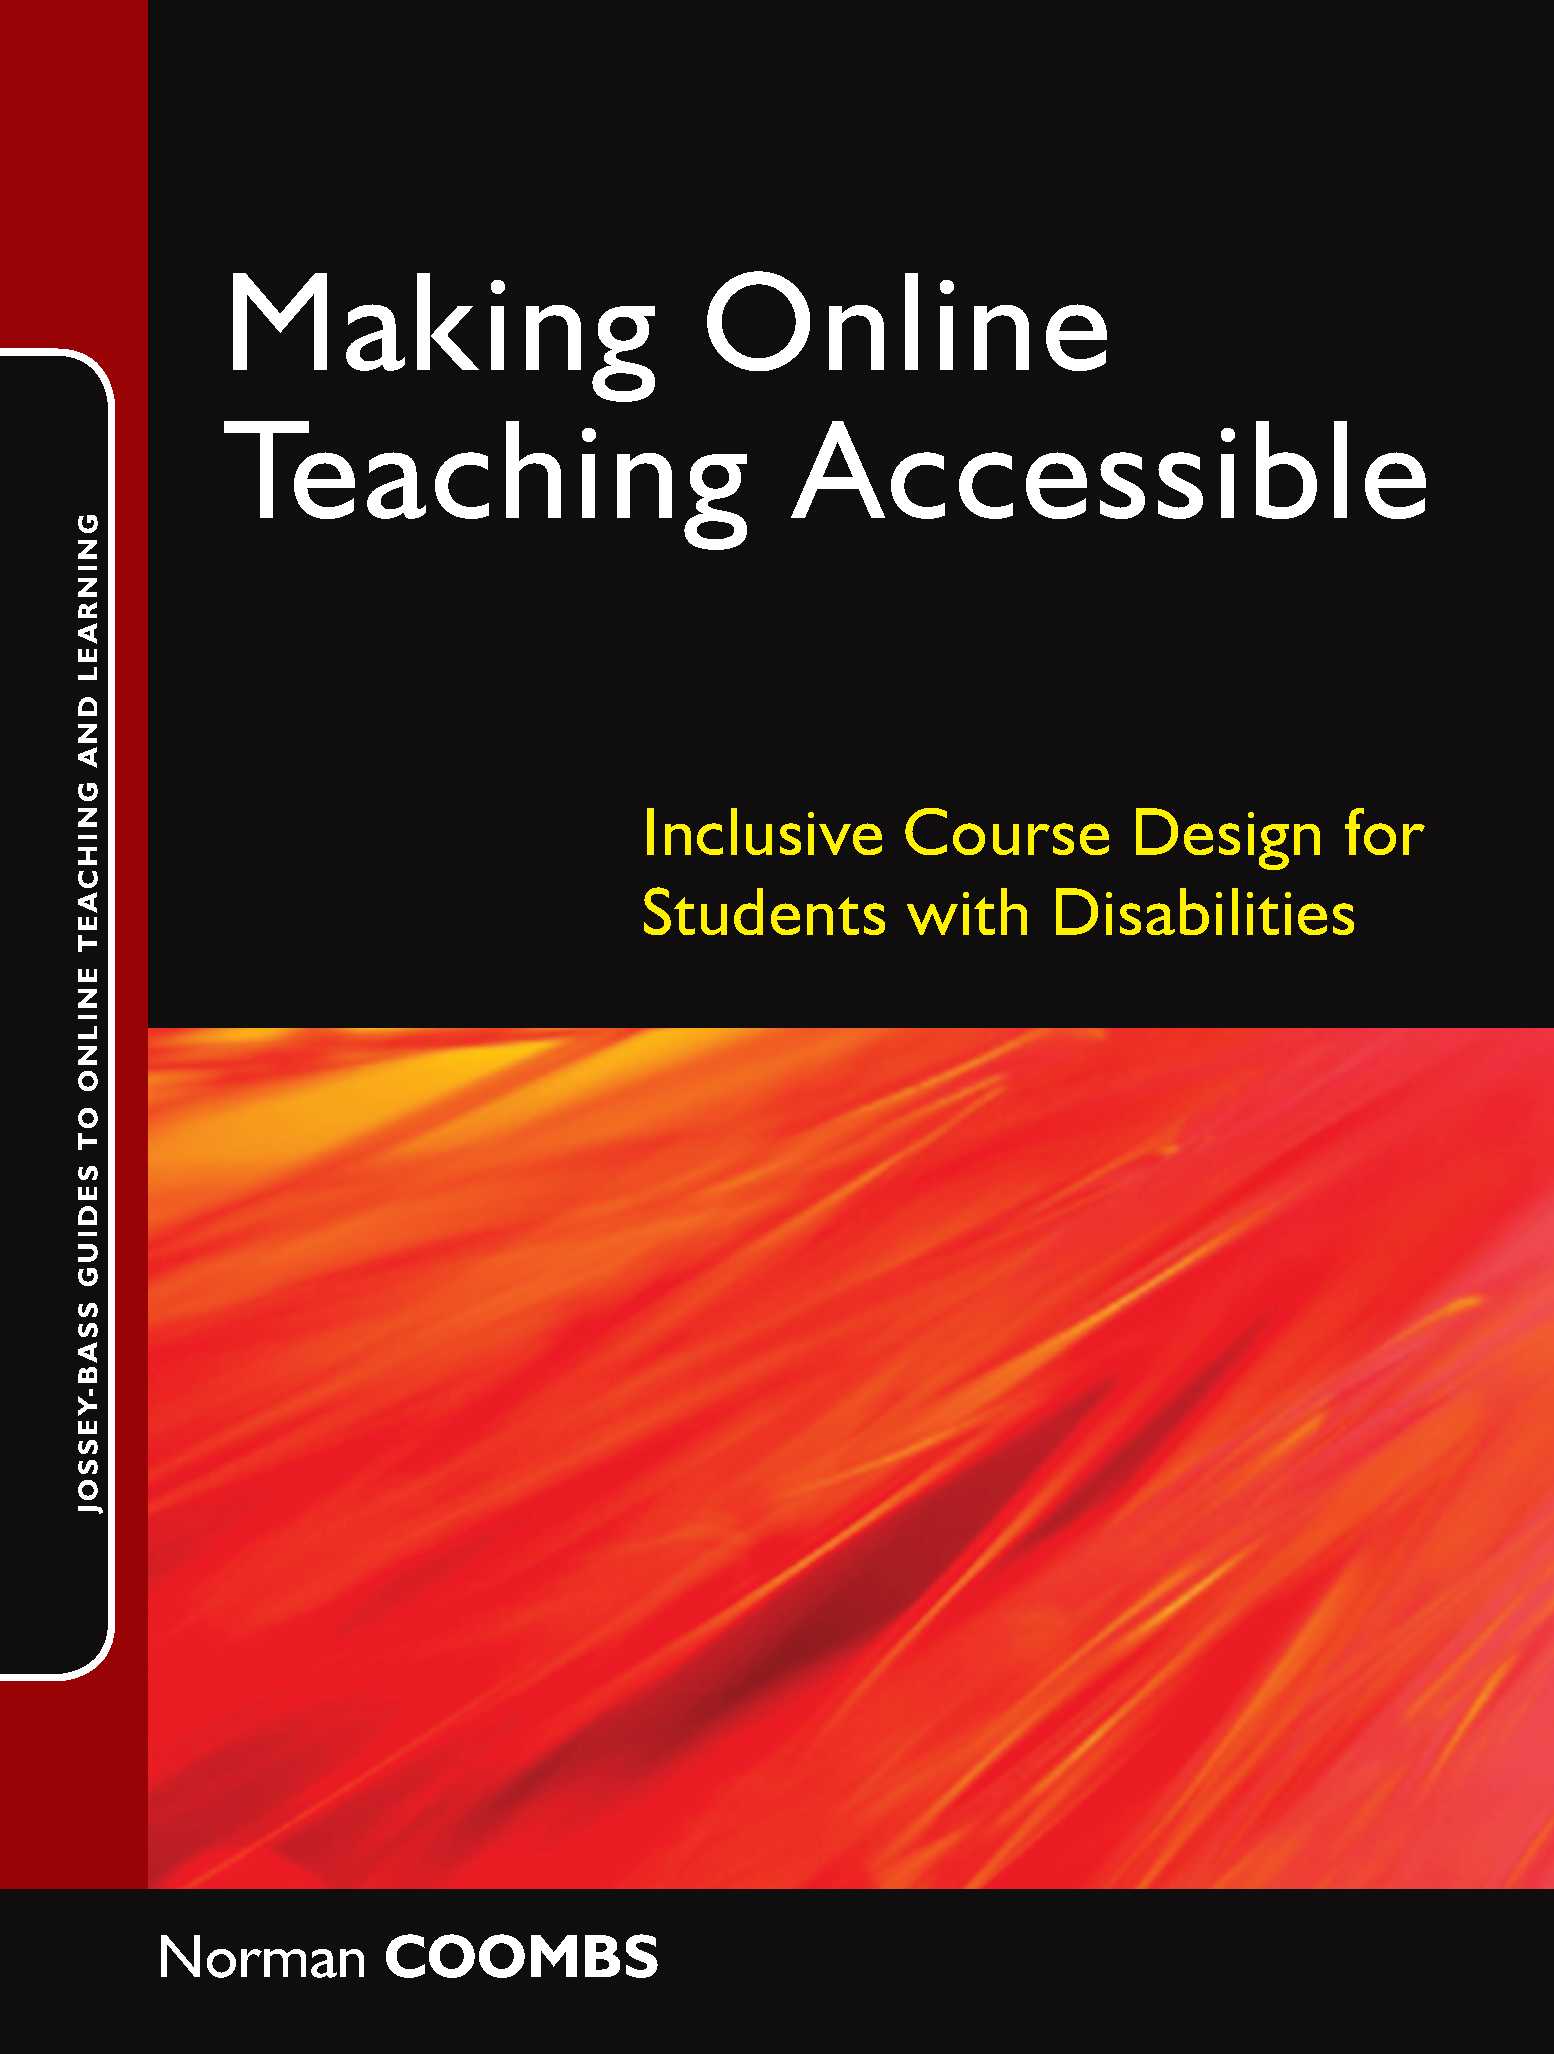 Making Online Teaching Accessible Book Cover 